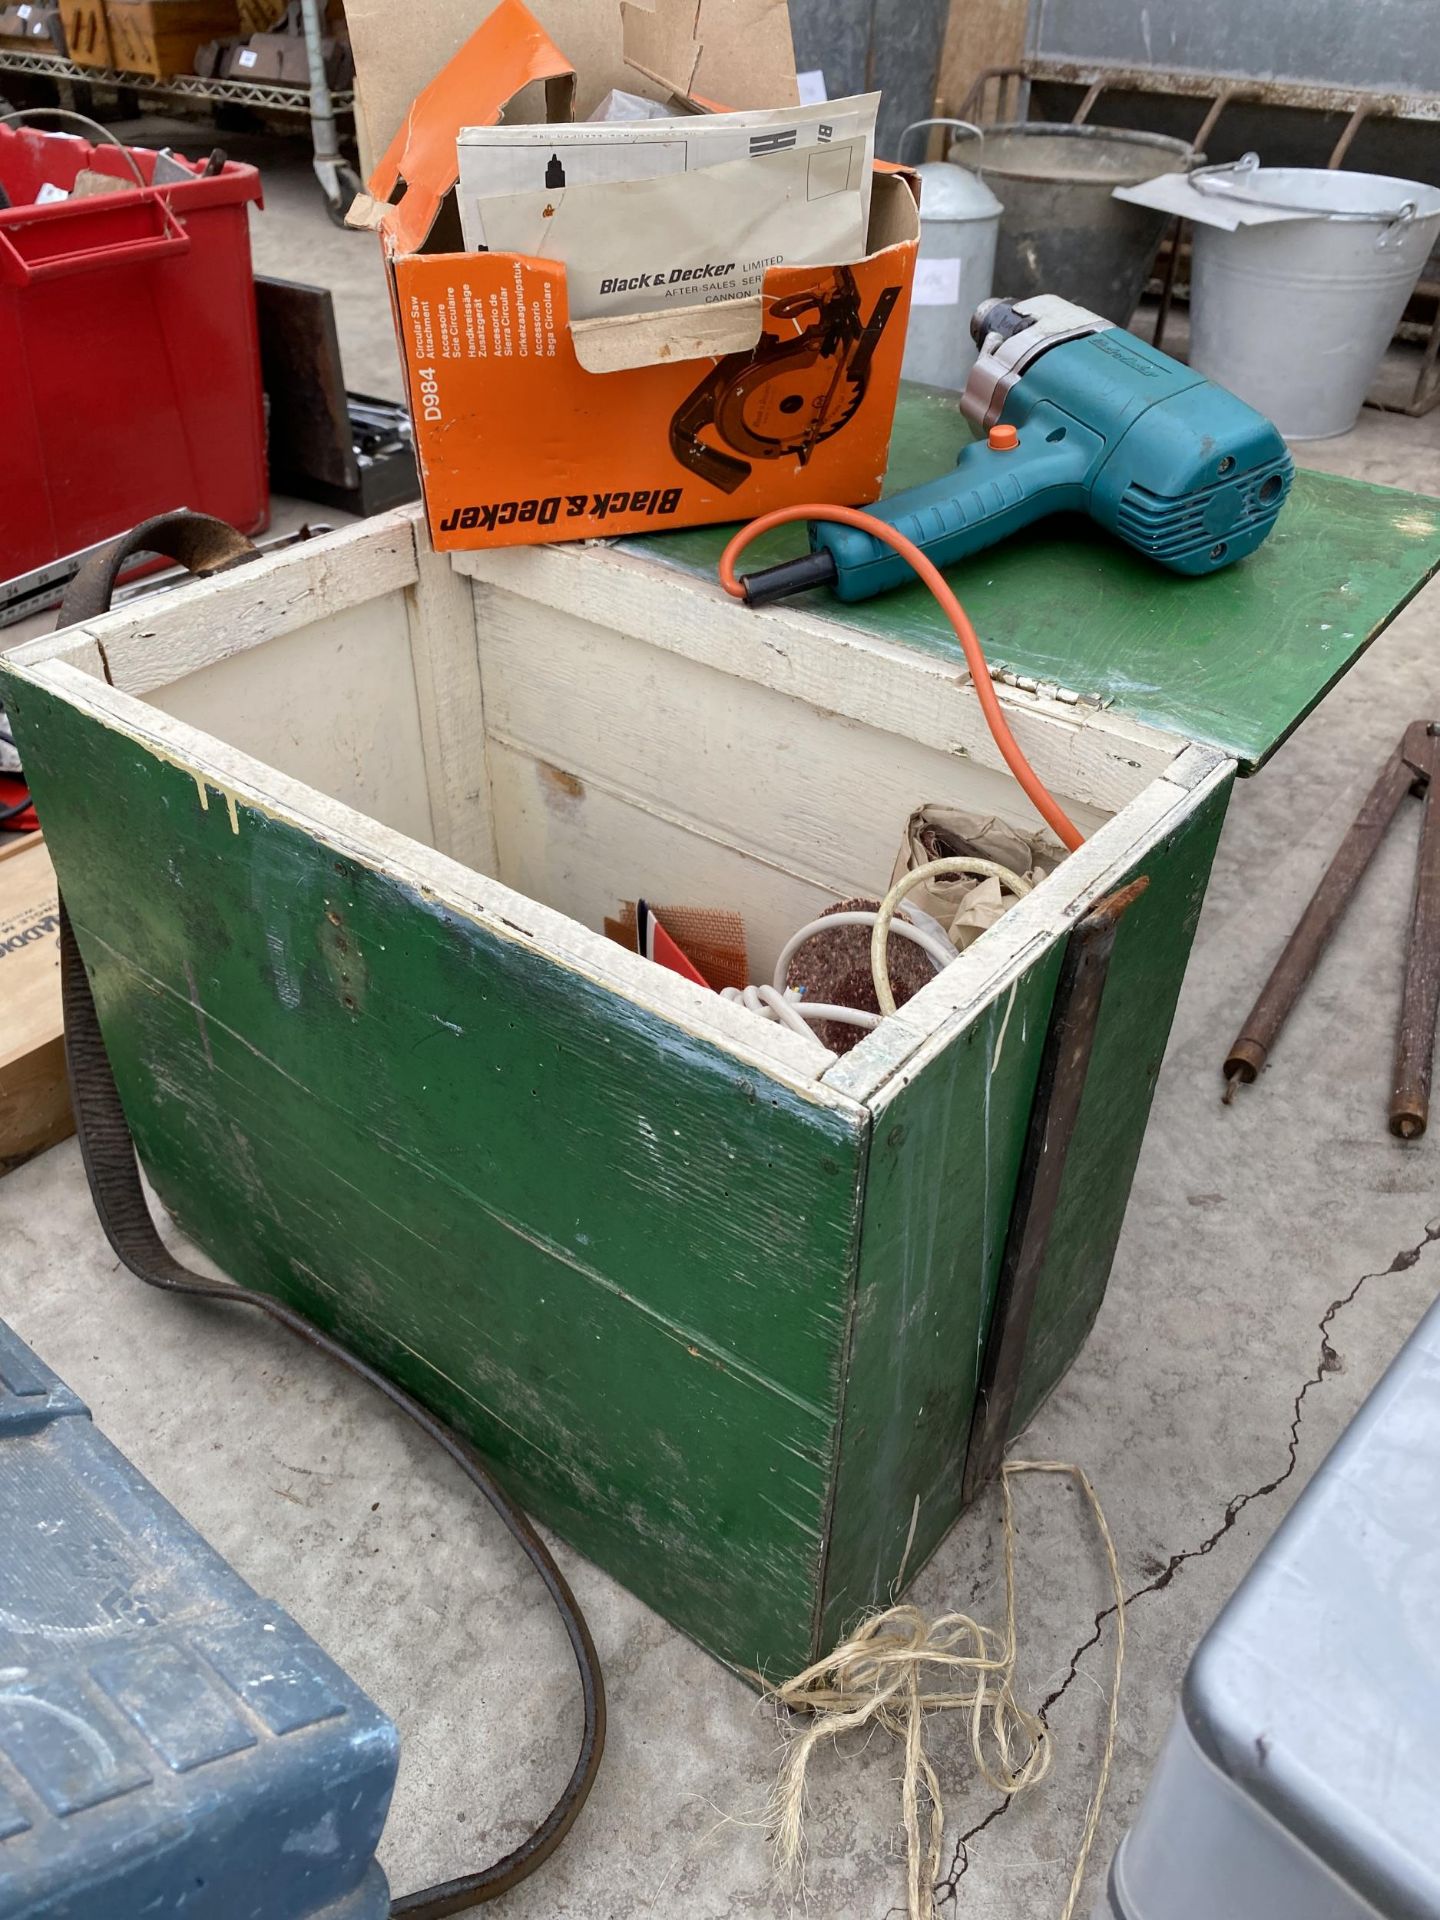 TWO TOOL BOXES CONTAINING VARIOUS TOOLS TO INCLUDE STILSENS, PLIERS AND A HAMMER ETC - Image 6 of 8